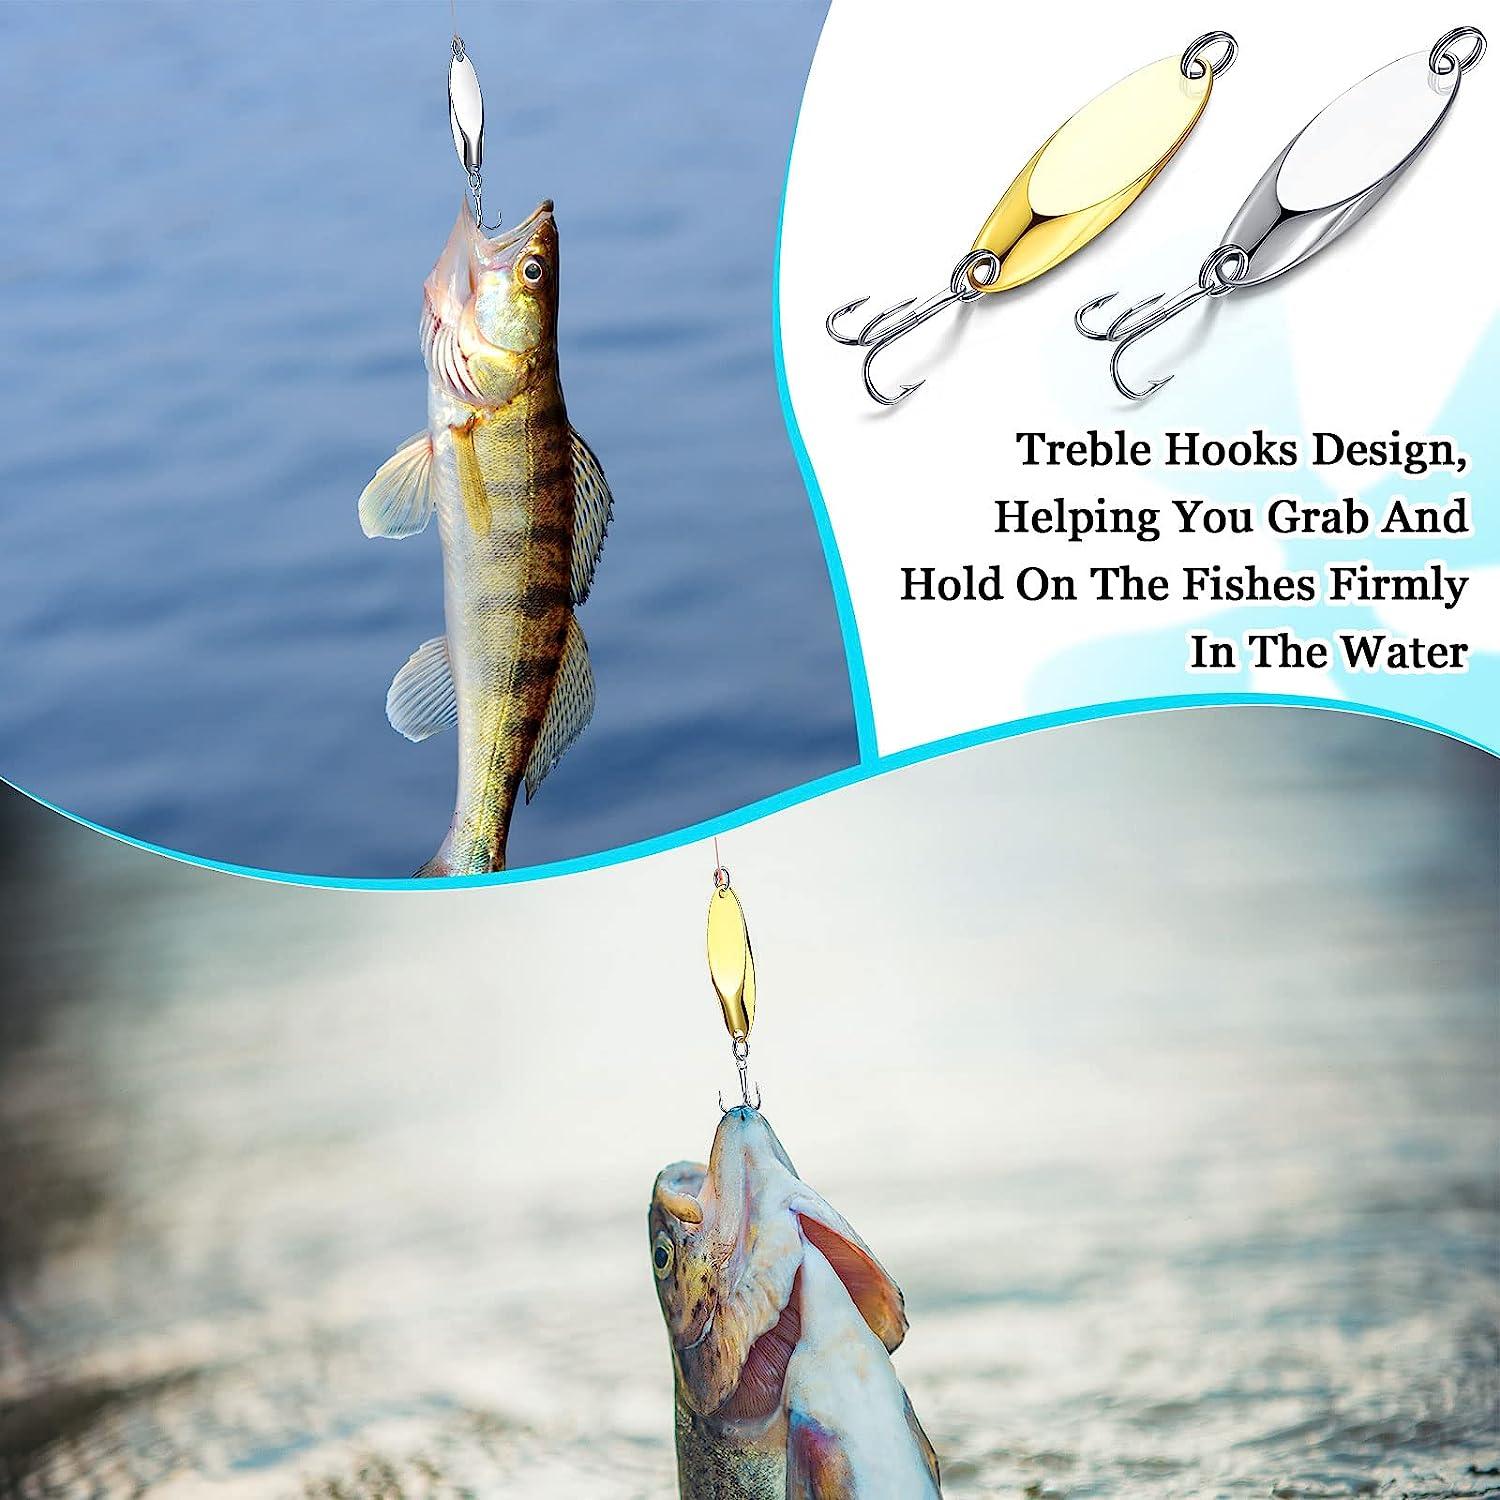 30 Pieces Fishing Spoons Lures, Treble Hooks Fishing Spoons Hard Metal  Spoon Lures Spoons for Huge Distance Cast Saltwater Freshwater Fishing in  1/5 oz 1/4 oz 3/8 oz 1/2 oz 3/4 oz Gold,Silver